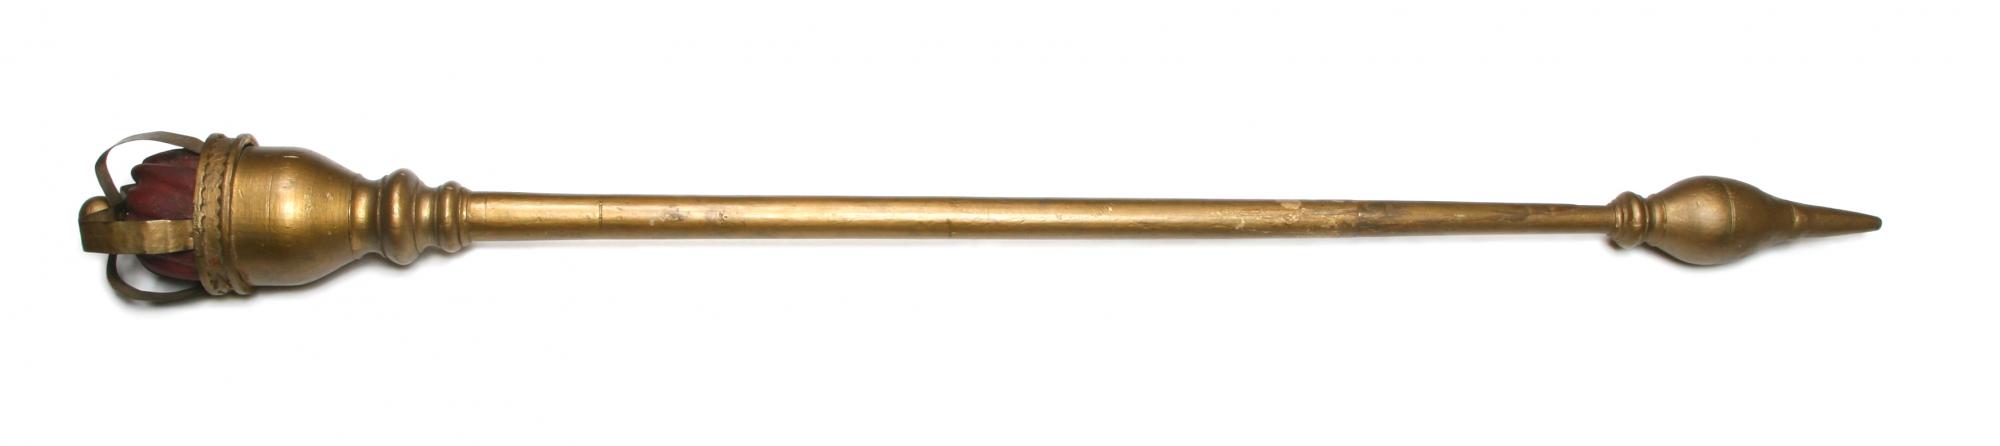 Image of the Mace of Upper Canada